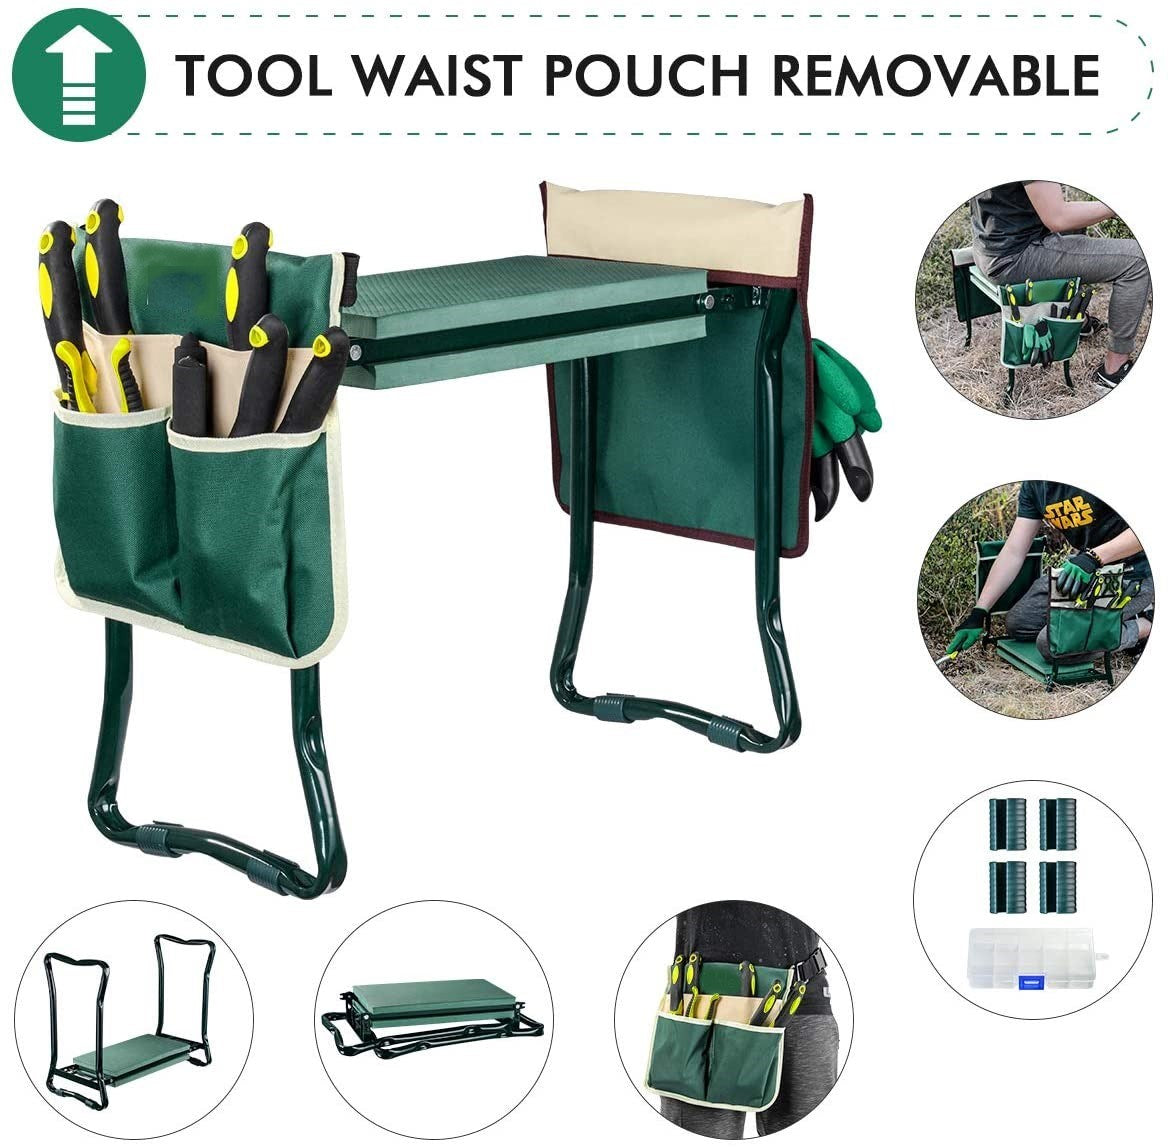 Garden Kneeler and Seat with 2 Bonus Tool Pouches - Portable Garden Bench EVA Foam Pad with Kneeling Pad for Gardening - Sturdy, Lightweight and Practical - Protect Knees and Clothes When Gardening XH